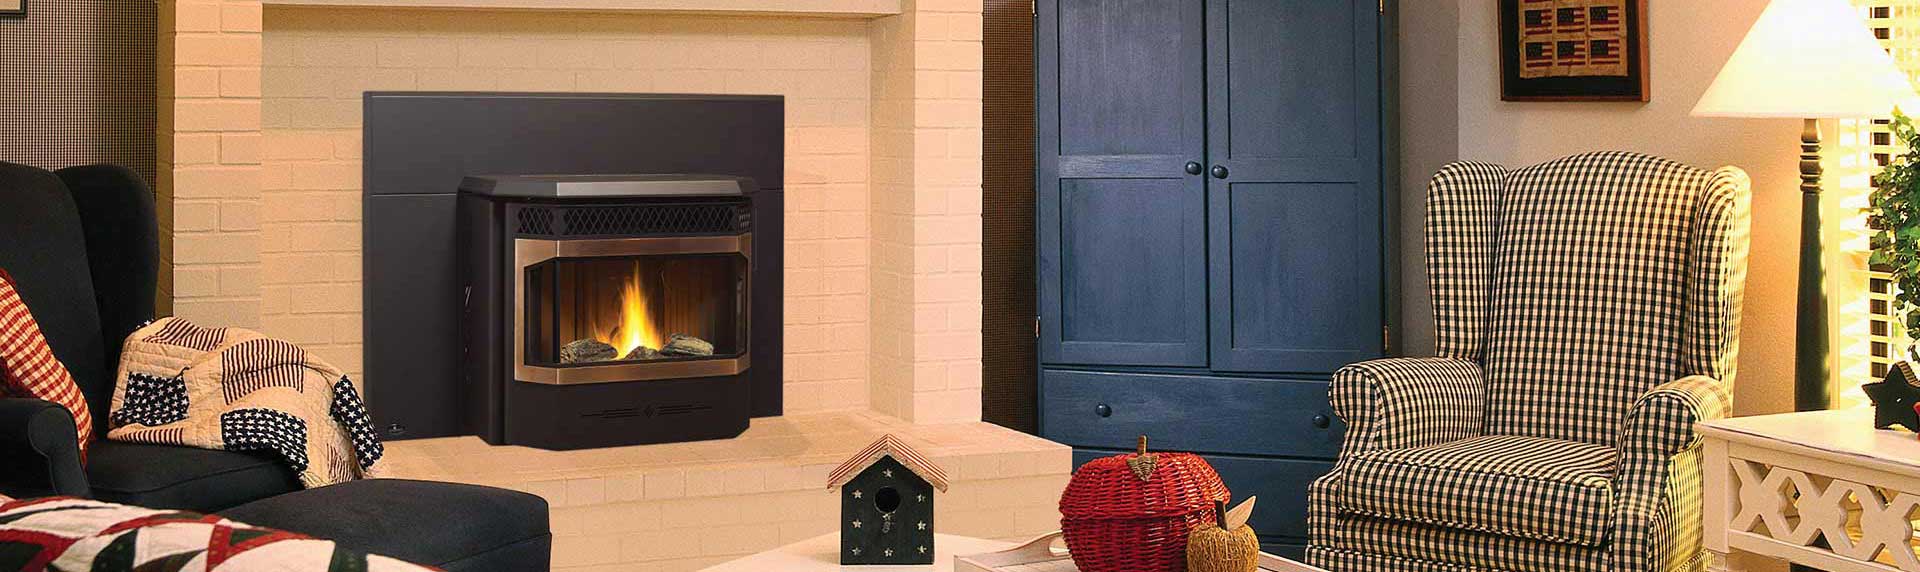 Traditional black and stainless Pellet Insert with beige brick surround and mantle